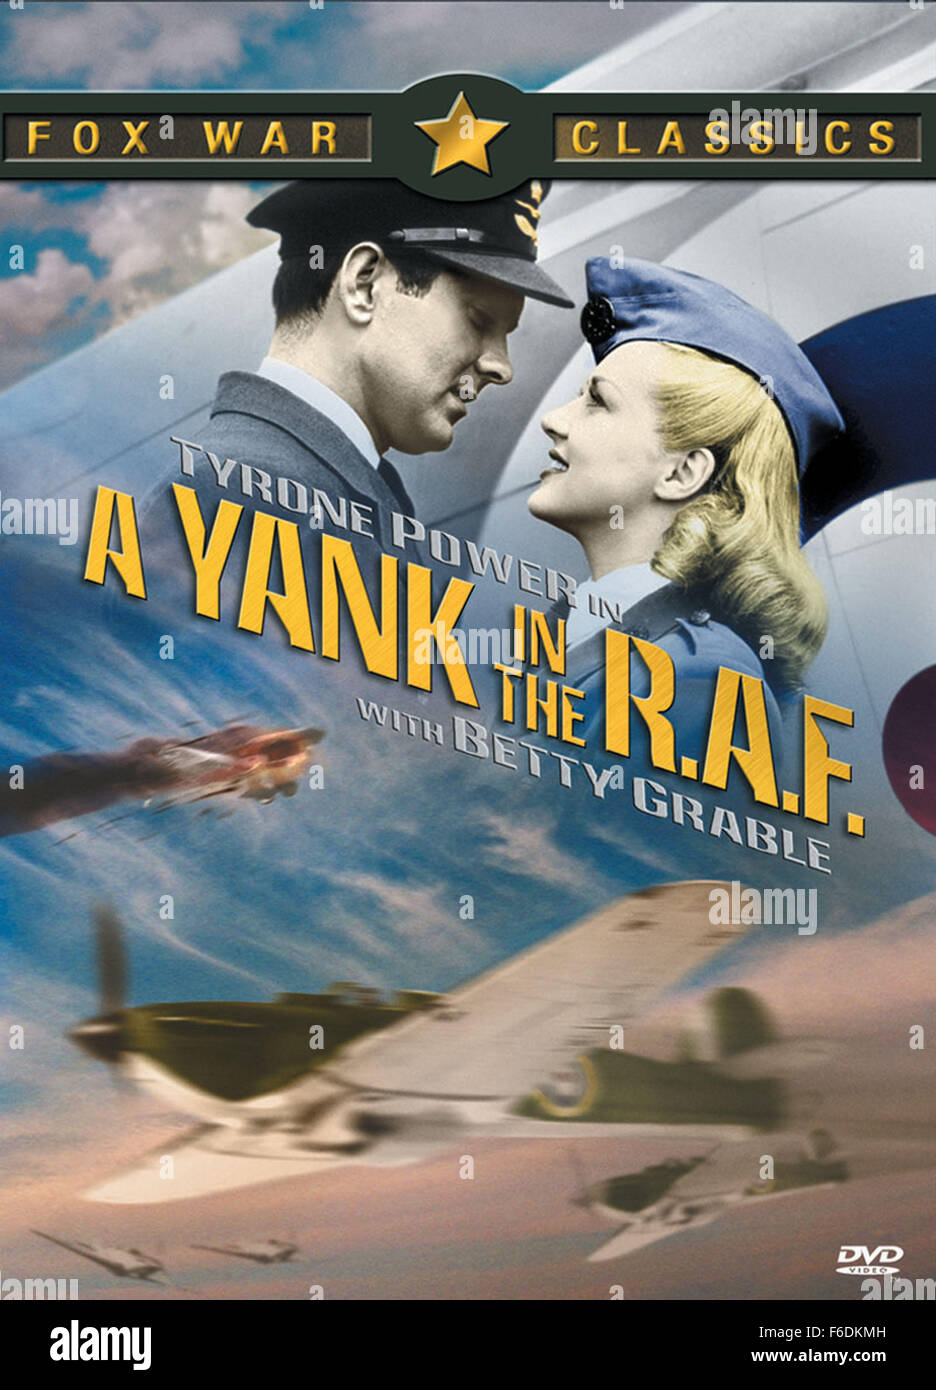 RELEASE DATE: Sep 26, 1941. MOVIE TITLE: A Yank in the R.A.F. STUDIO: 20th Century Fox. PLOT: Tyrone Power is a pilots' pilot, but he doesn't believe in anything beyond his own abilities. He gets into trouble by flying a new fighter directly to Canada instead of to New York and letting it be towed across as the law demands, but is offered a new job ferrying bombers to war torn England. While on a layover he finds Betty Grable, an old flame, has joined the RAF as a WREN in her attempt to fight for democracy. Power joins up to impress her and in the course of his several missions begins to devel Stock Photo